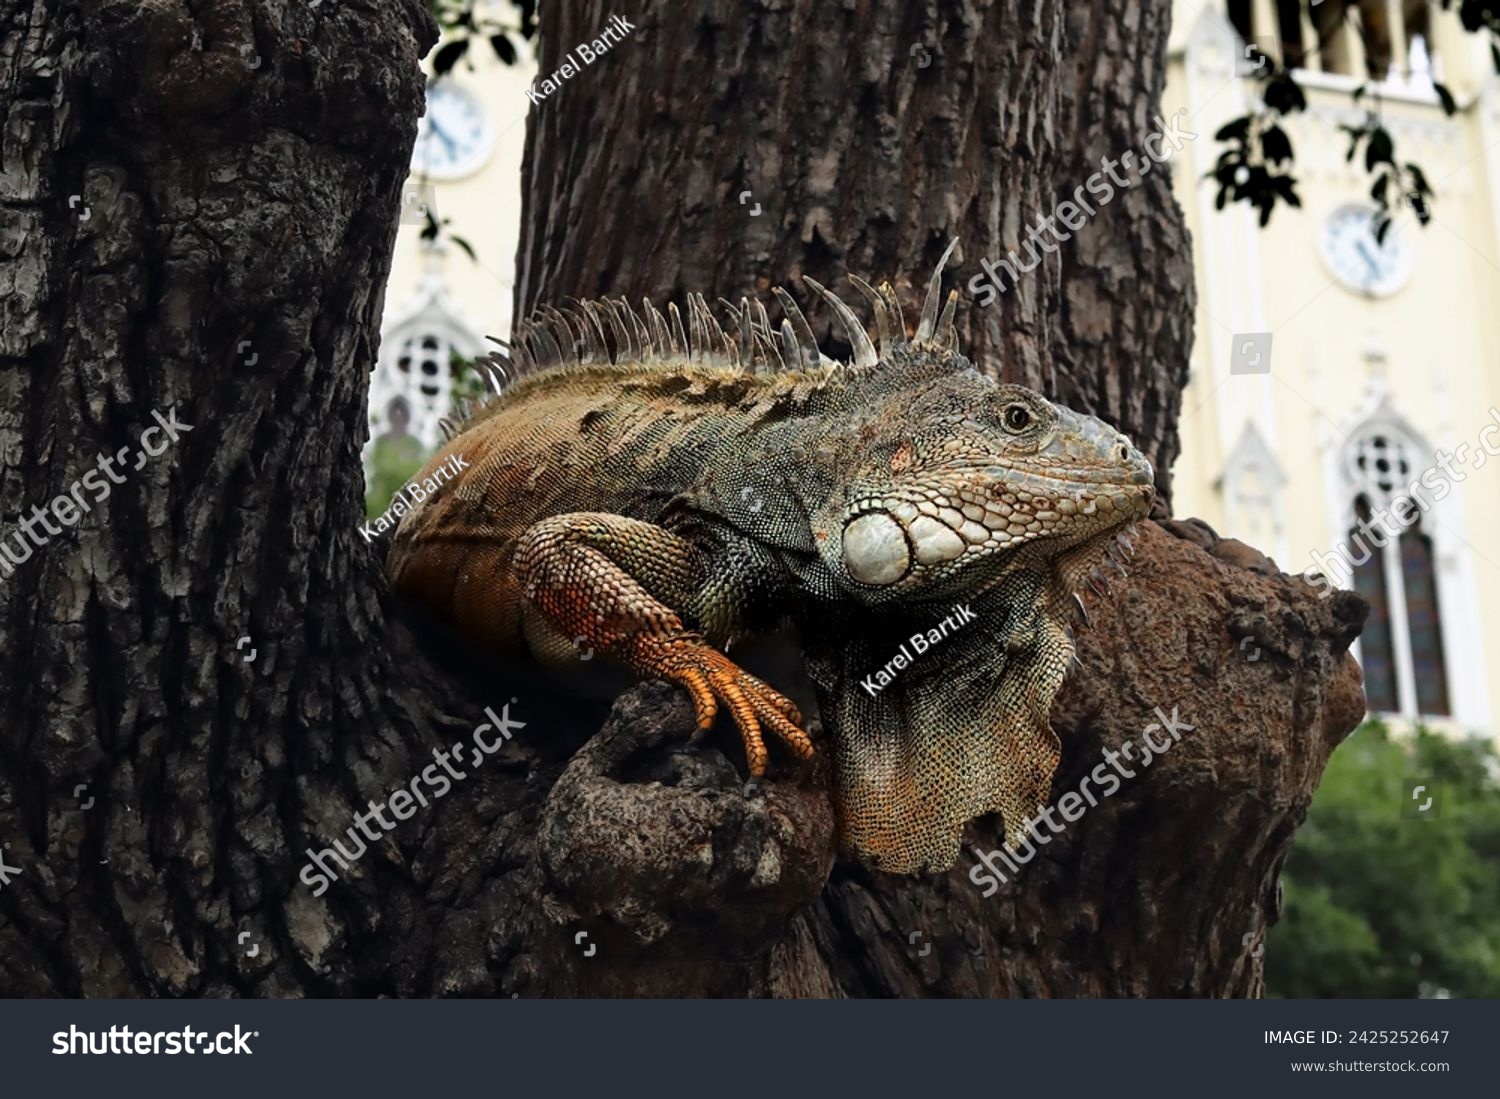 The green iguana (Iguana iguana), also known as the American or the common green iguana sitting on a tree in a city park. A large lizard on a tree with a temple in the background. #2425252647